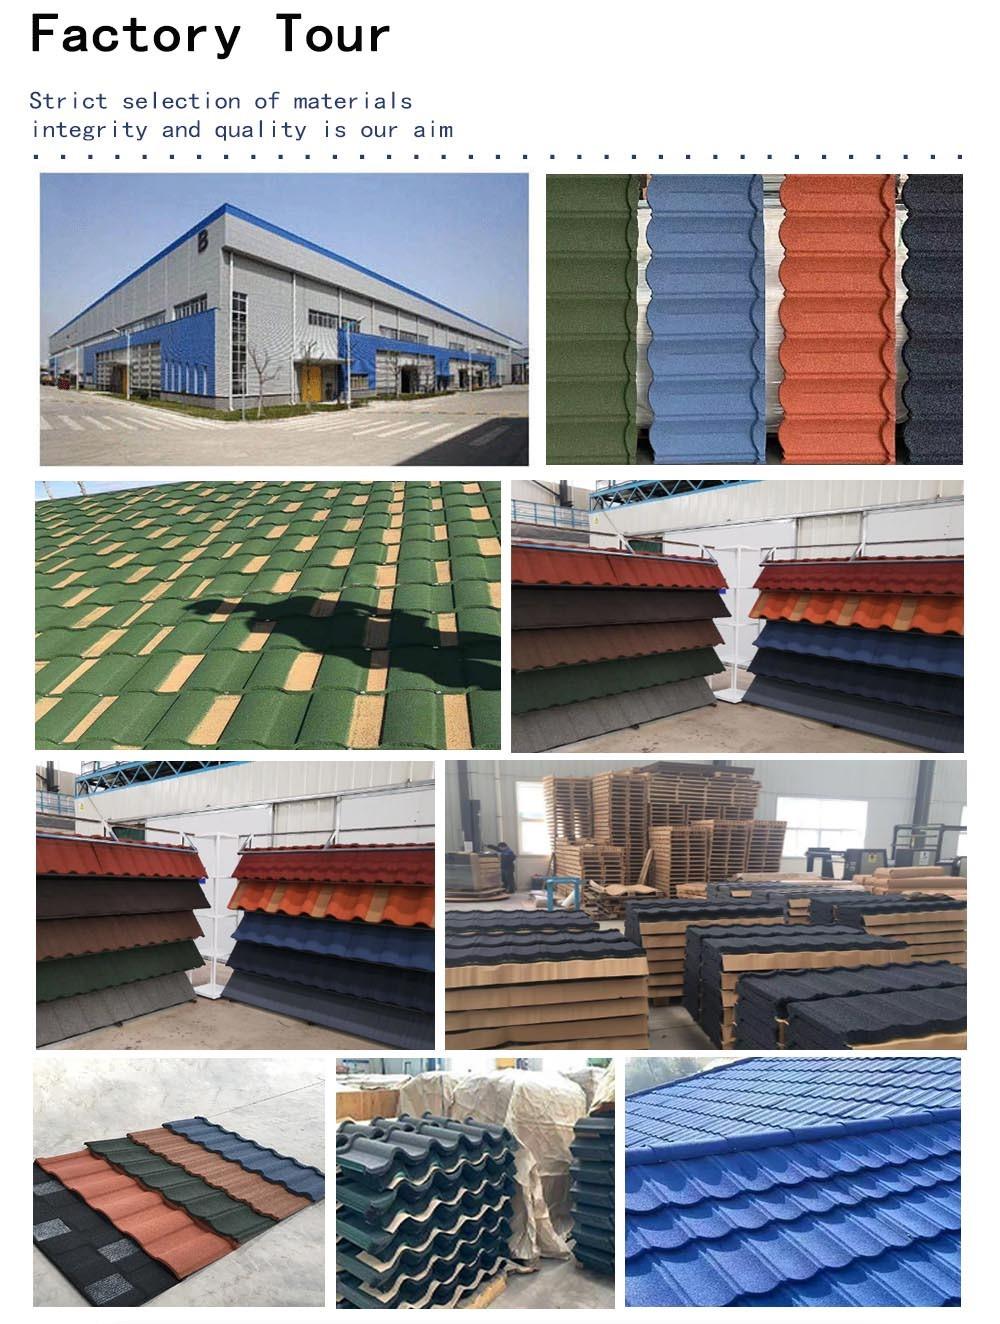 House Roof Construction Materials Color Stone Coated Metal Roof Tiles Metal Roof Tile